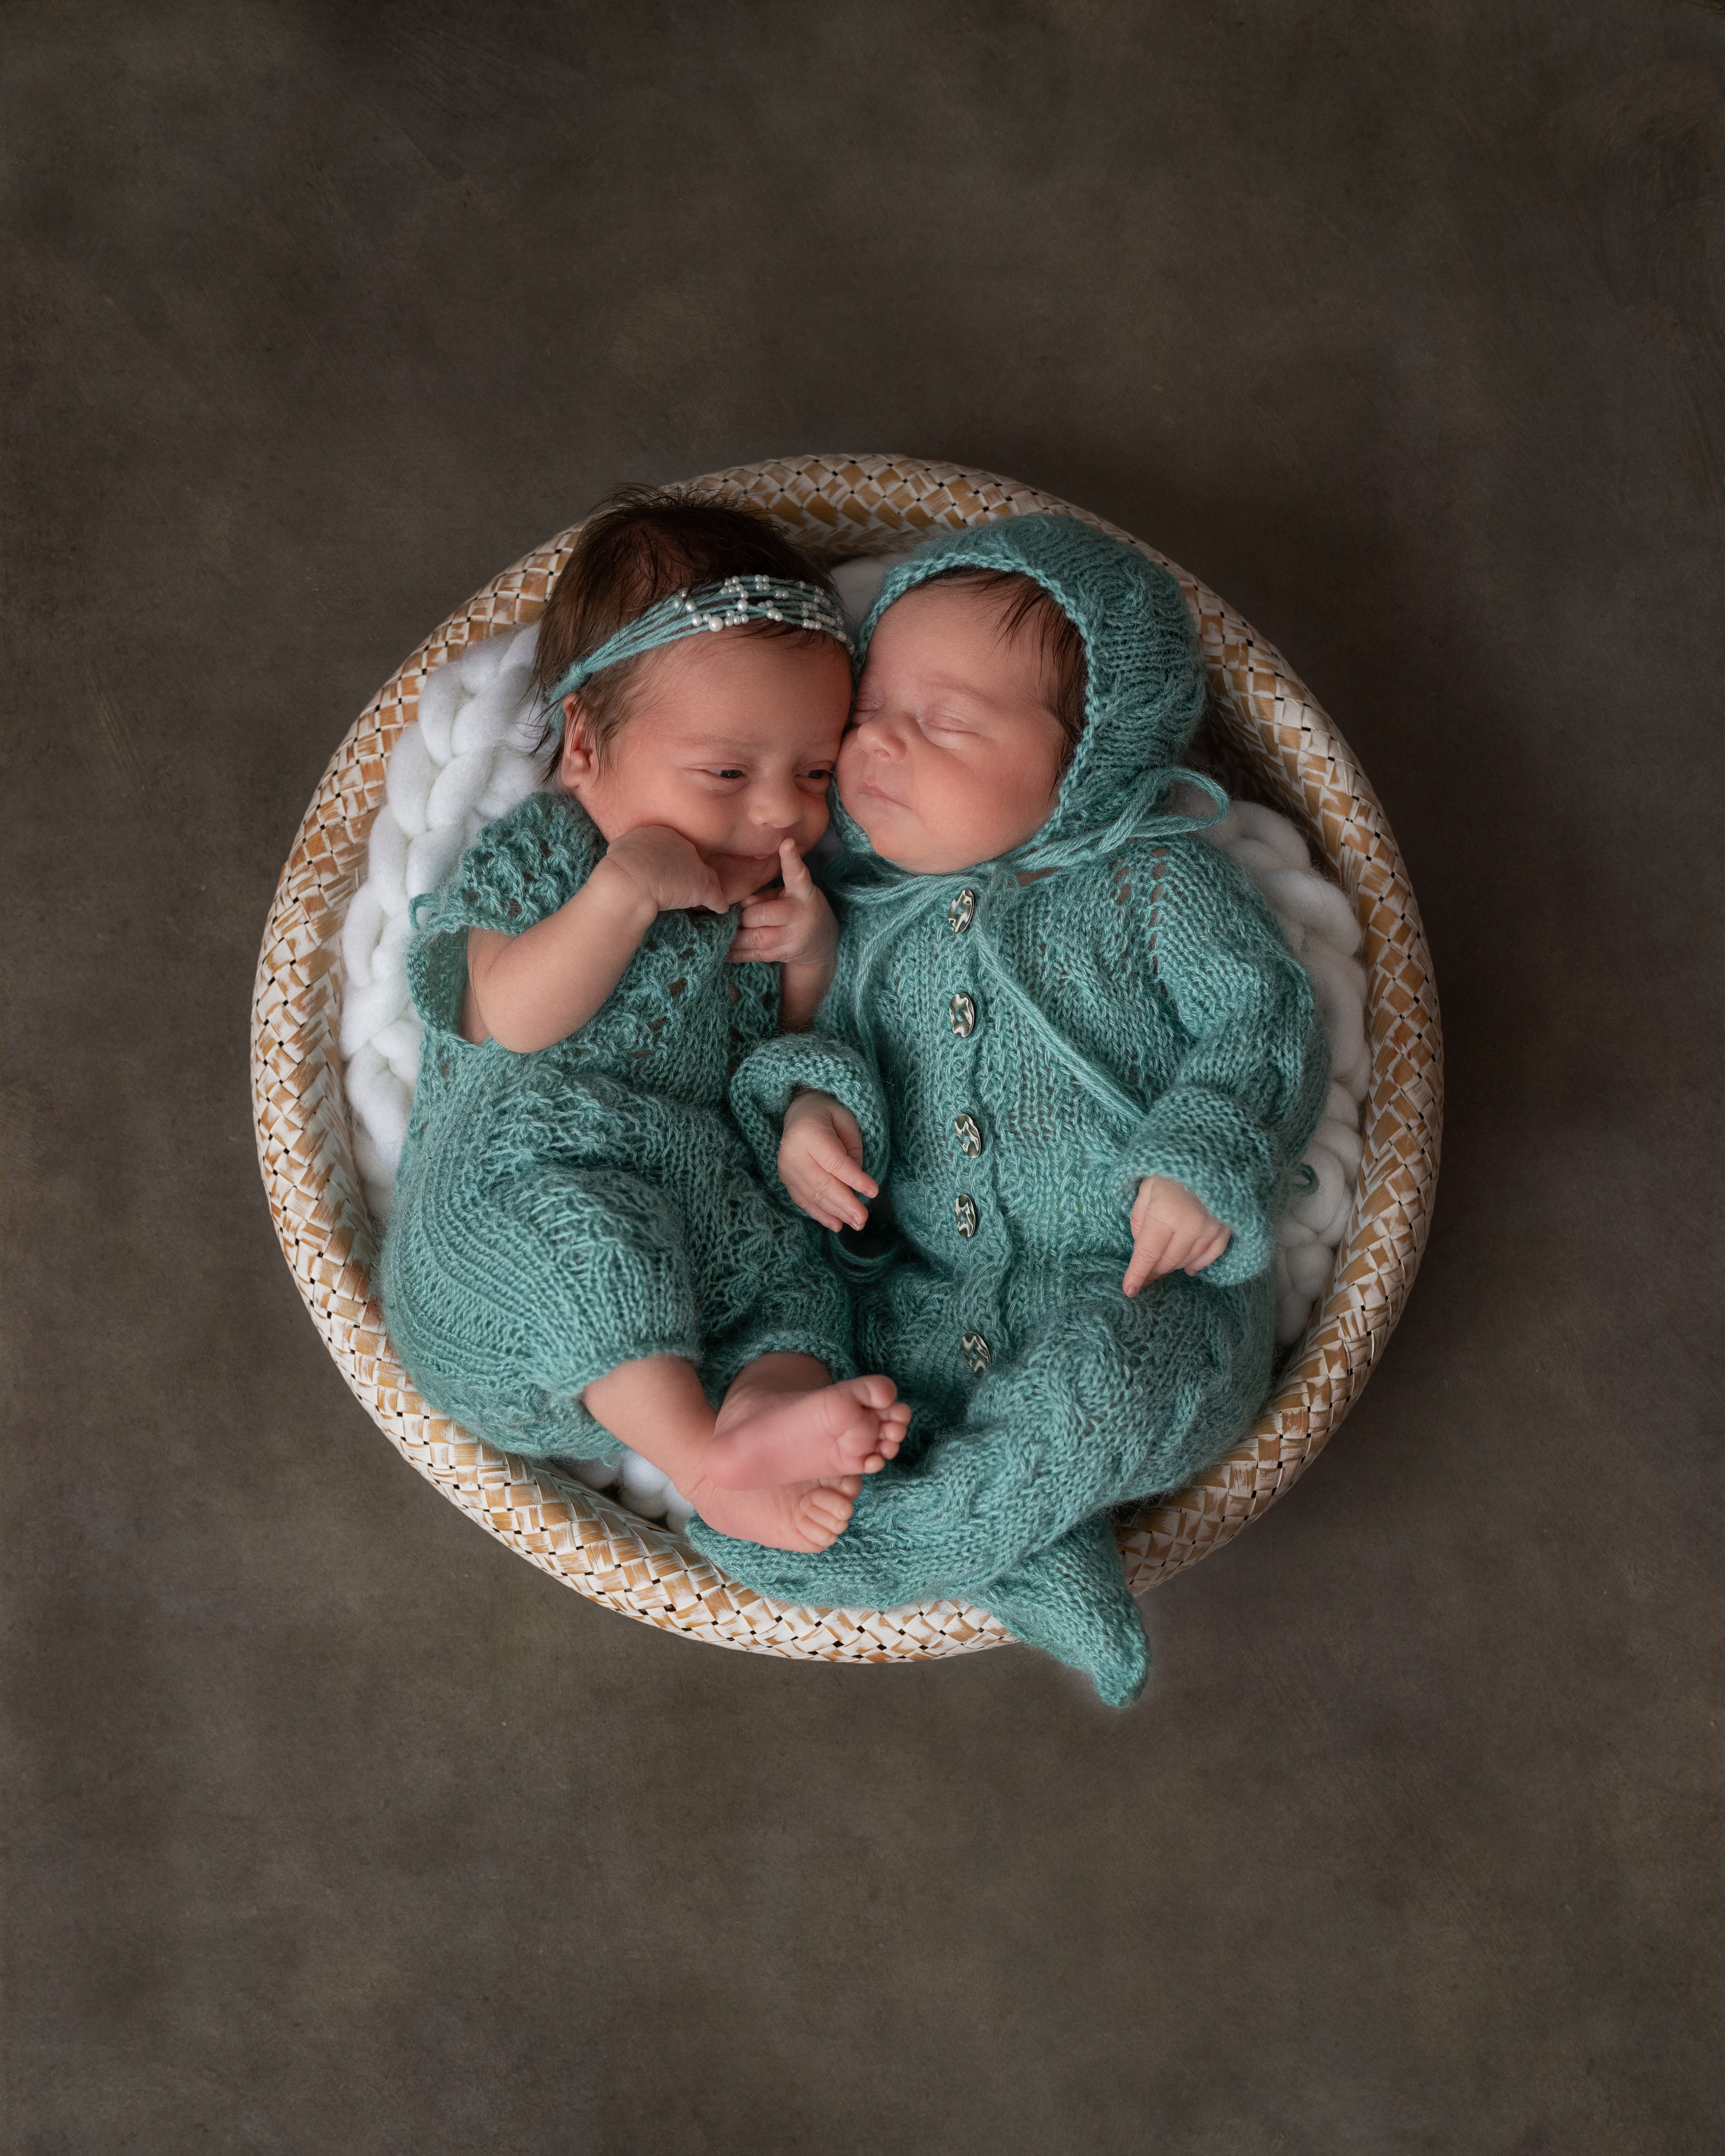 Two newborn babies lying next to each other. | Source: Unsplash